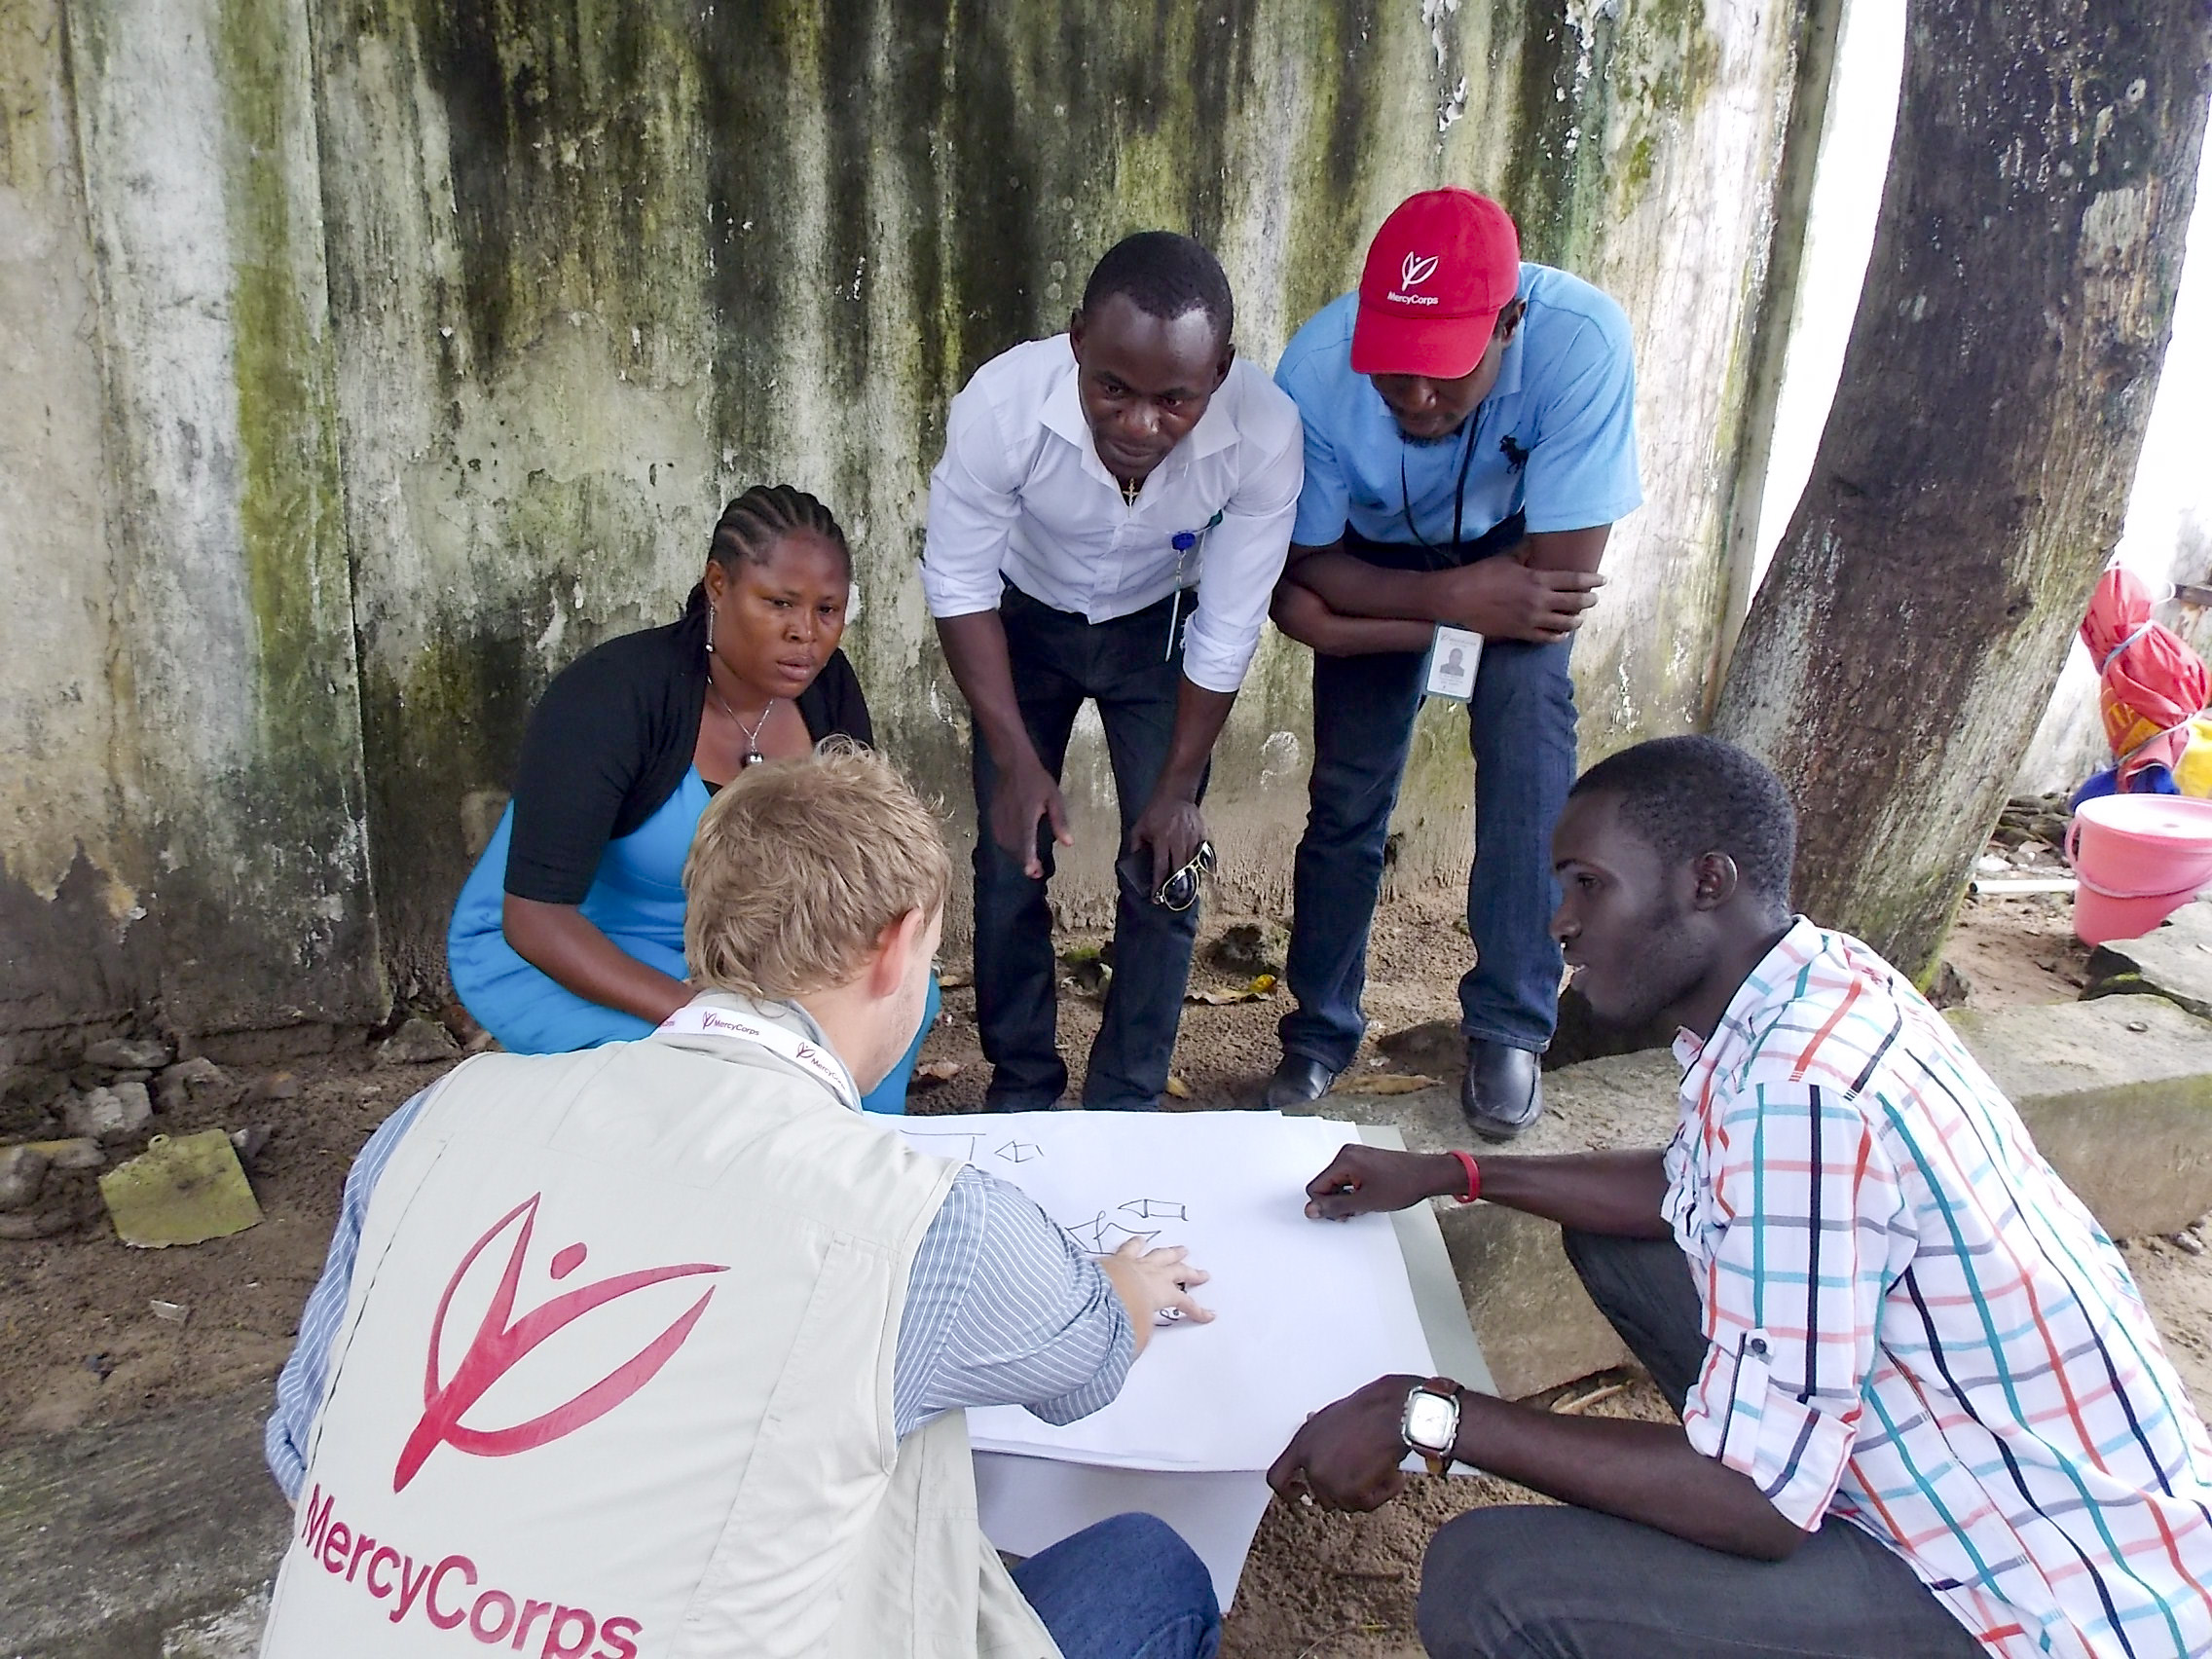 2014 Monrovia, Liberia. An image from the Mercy Corps response to the Ebola virus. Activities are focused on community education and prevention.  Pictured is Christopher Maclay.